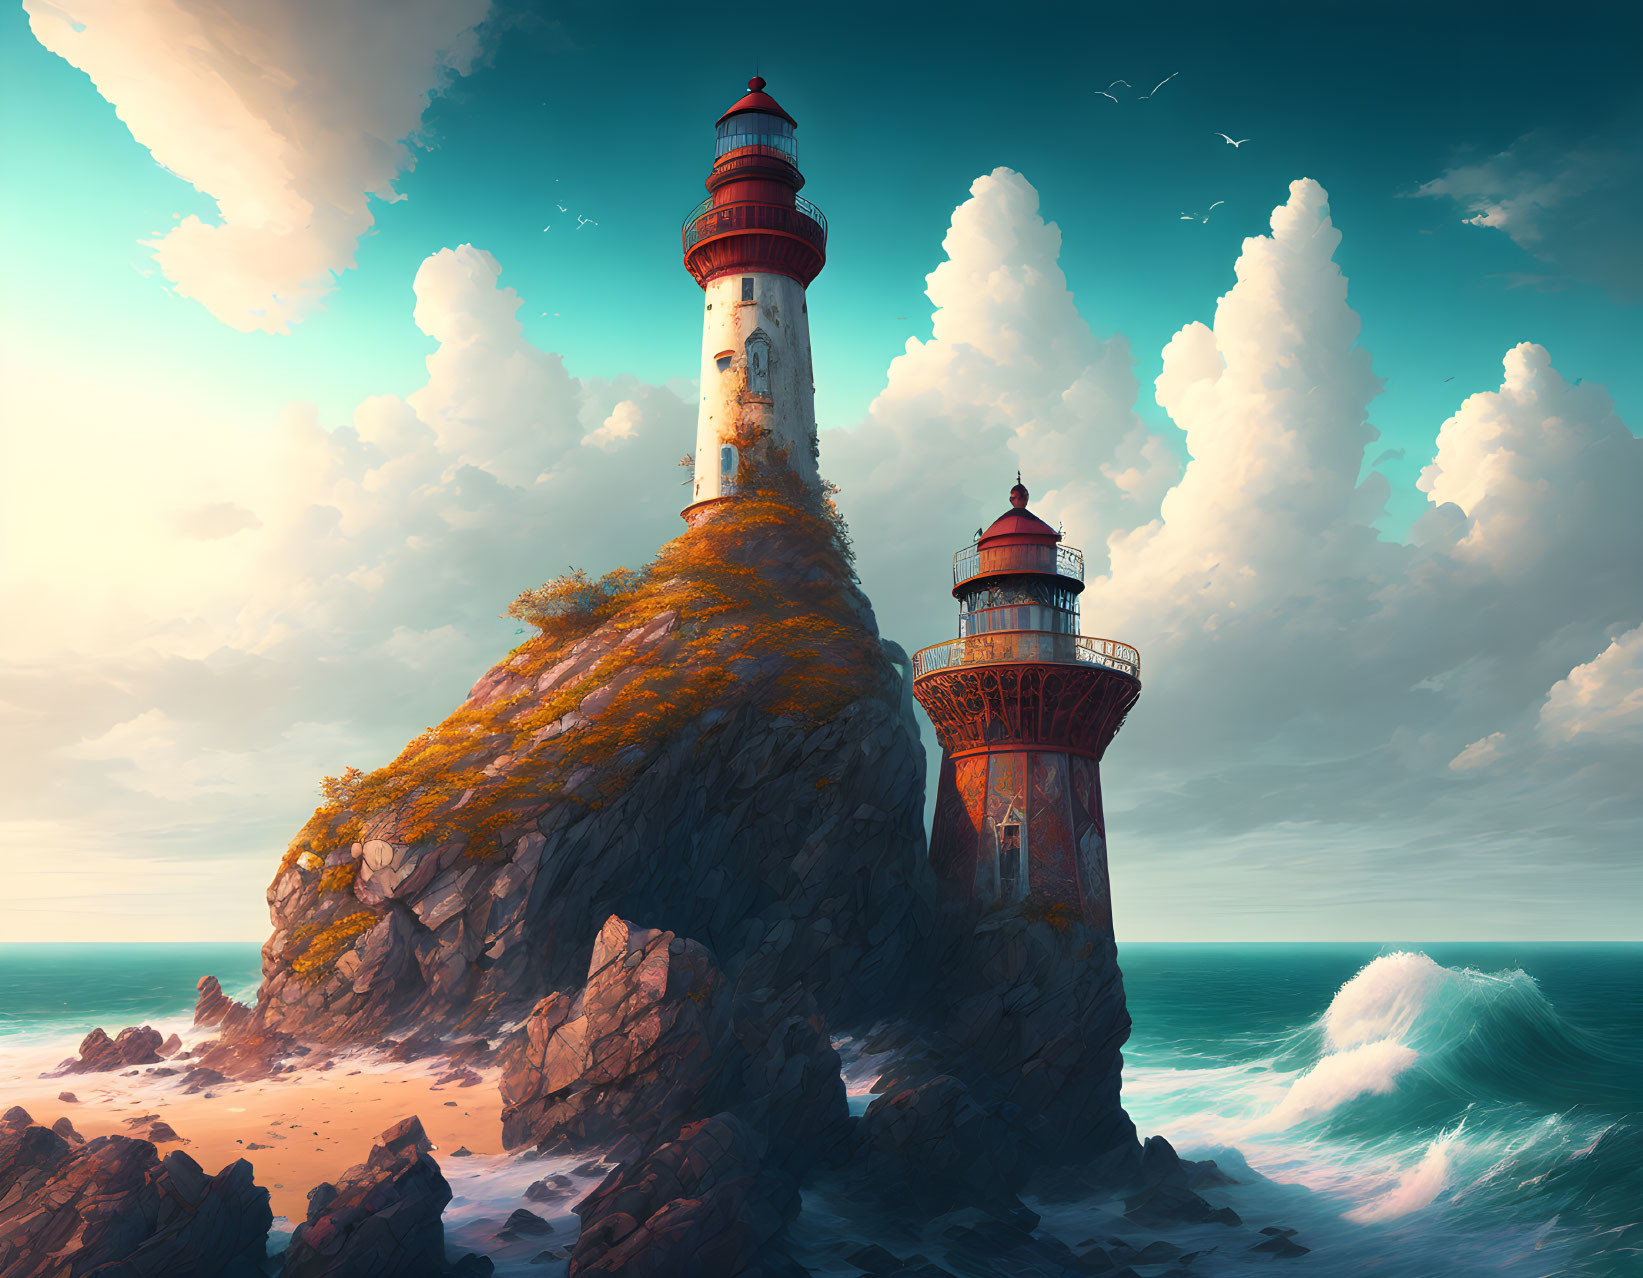 Two lighthouses on rocky outcrops with crashing waves and fluffy clouds